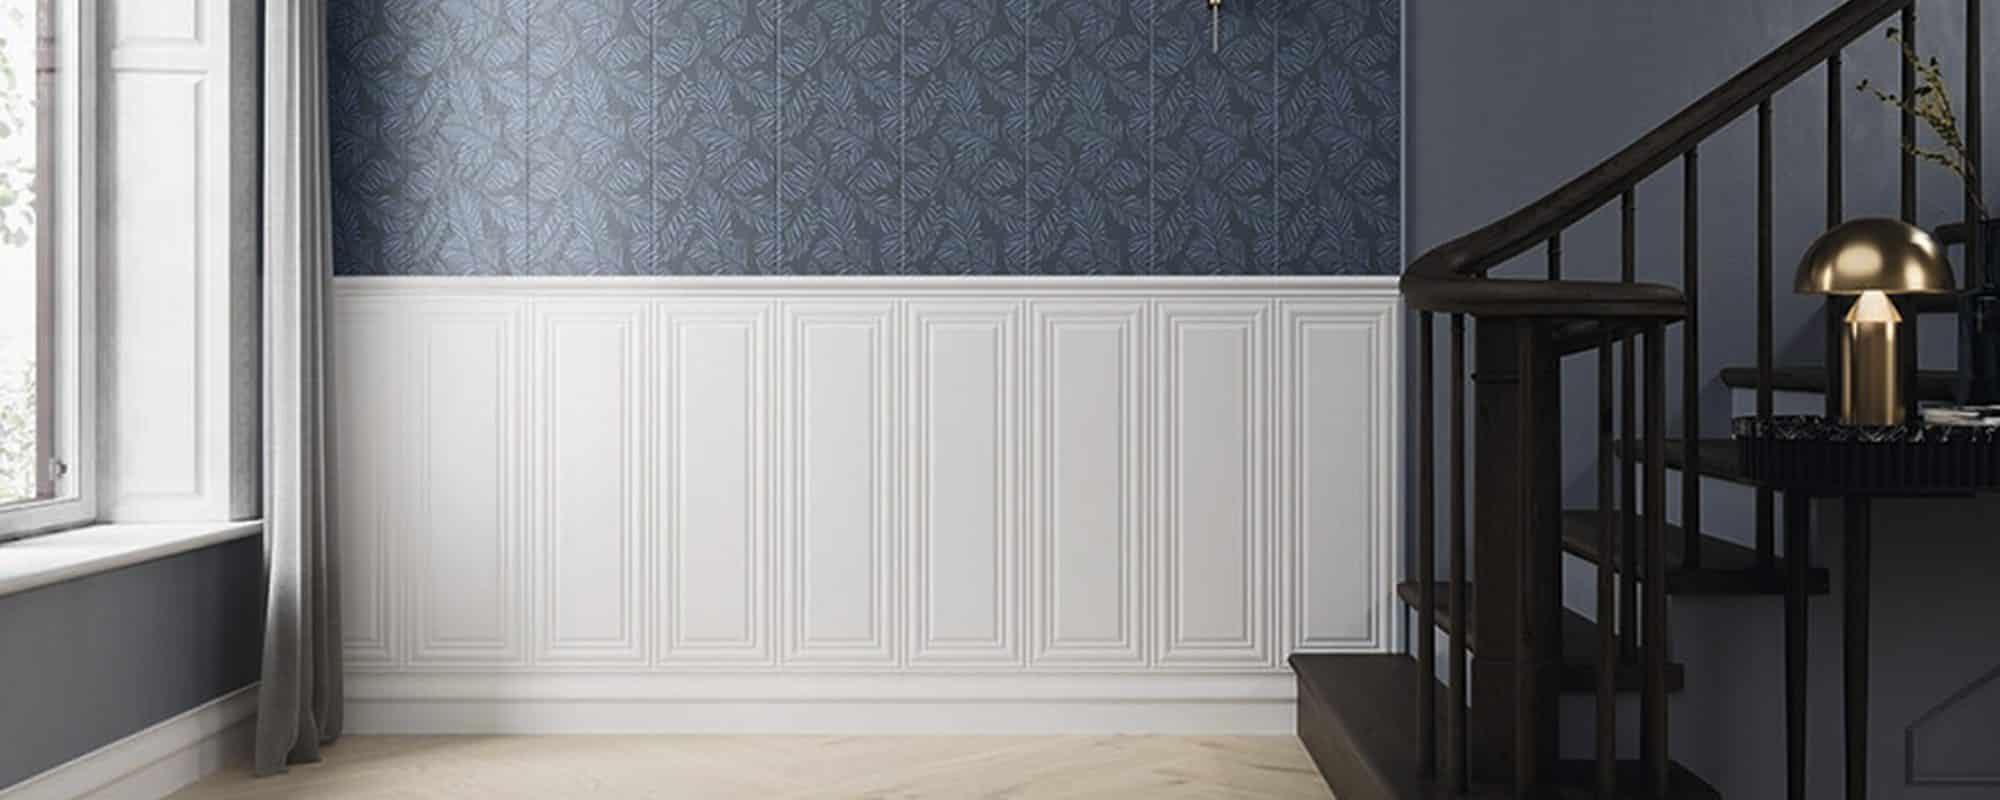 FABLES porcelain materials Wall tiles with Textile effect slider